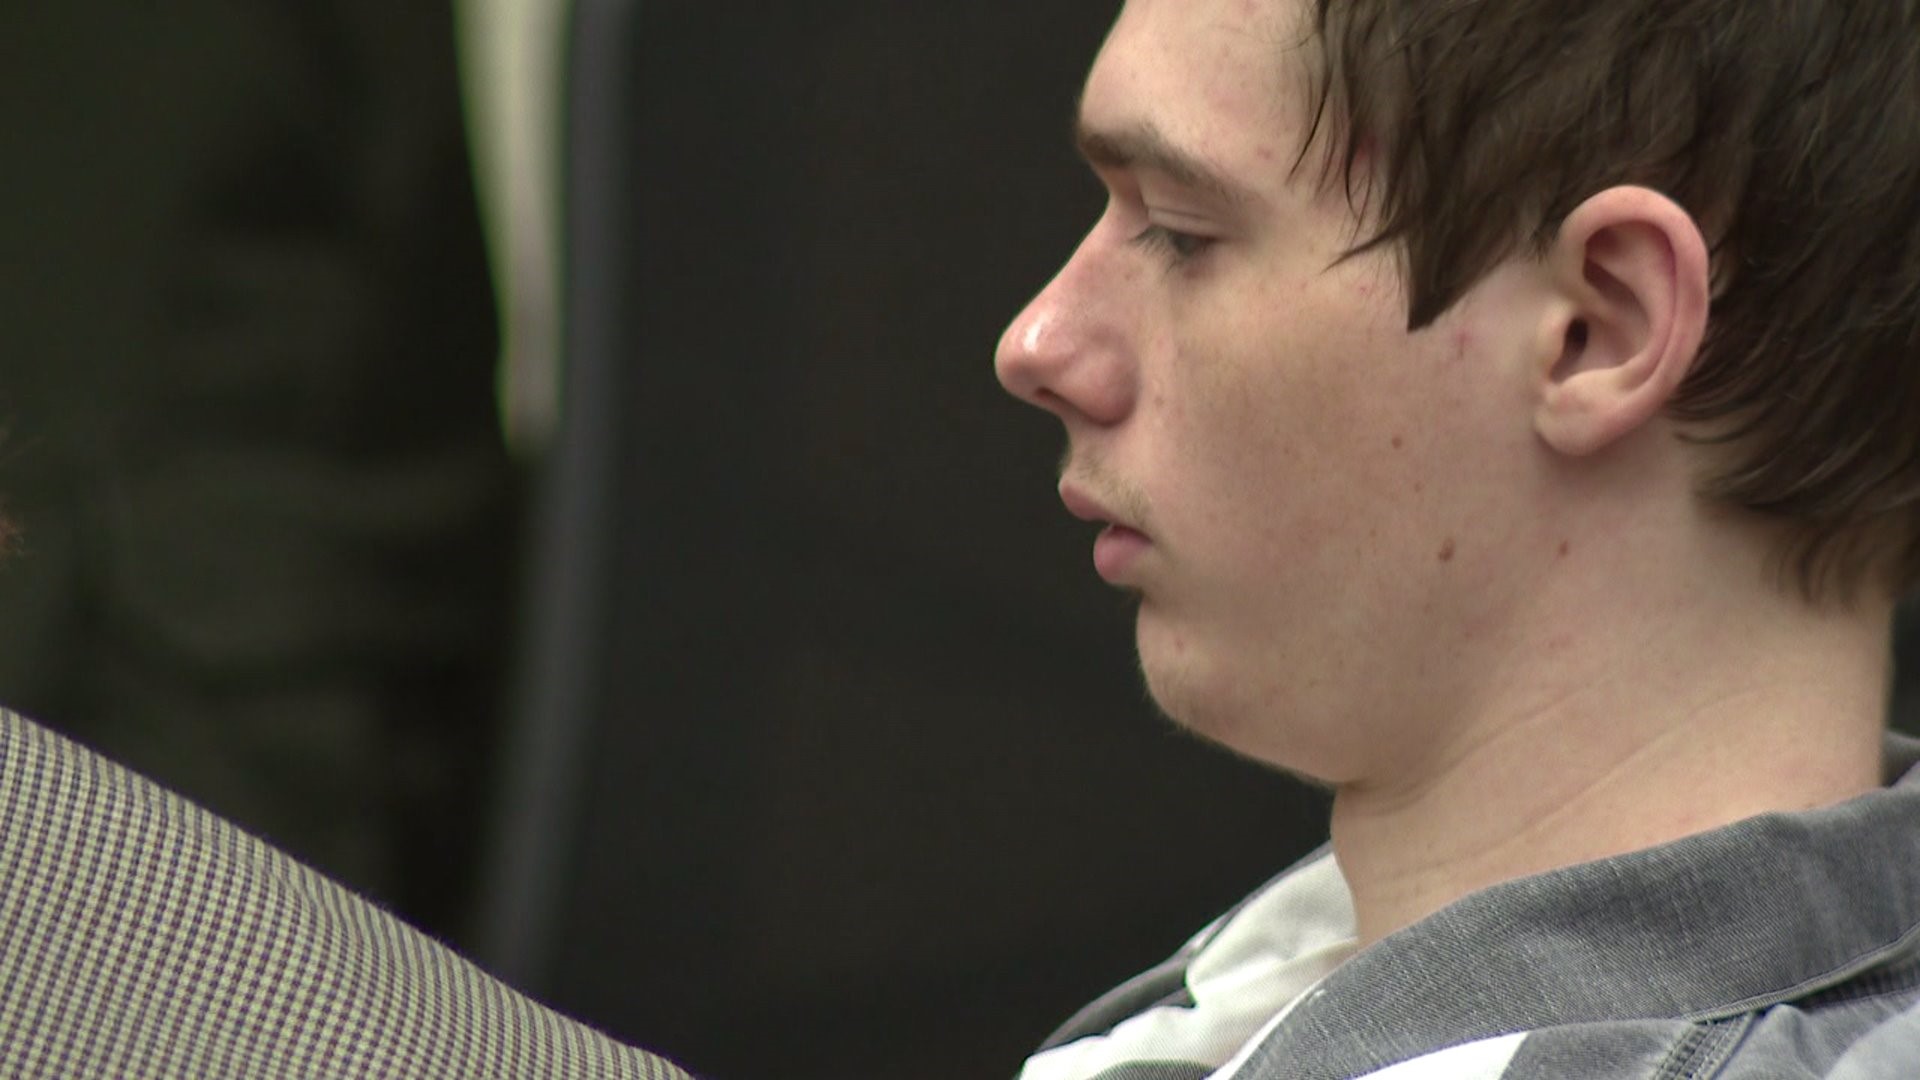 Matthew Milby appears in court for Dixon High School shooting